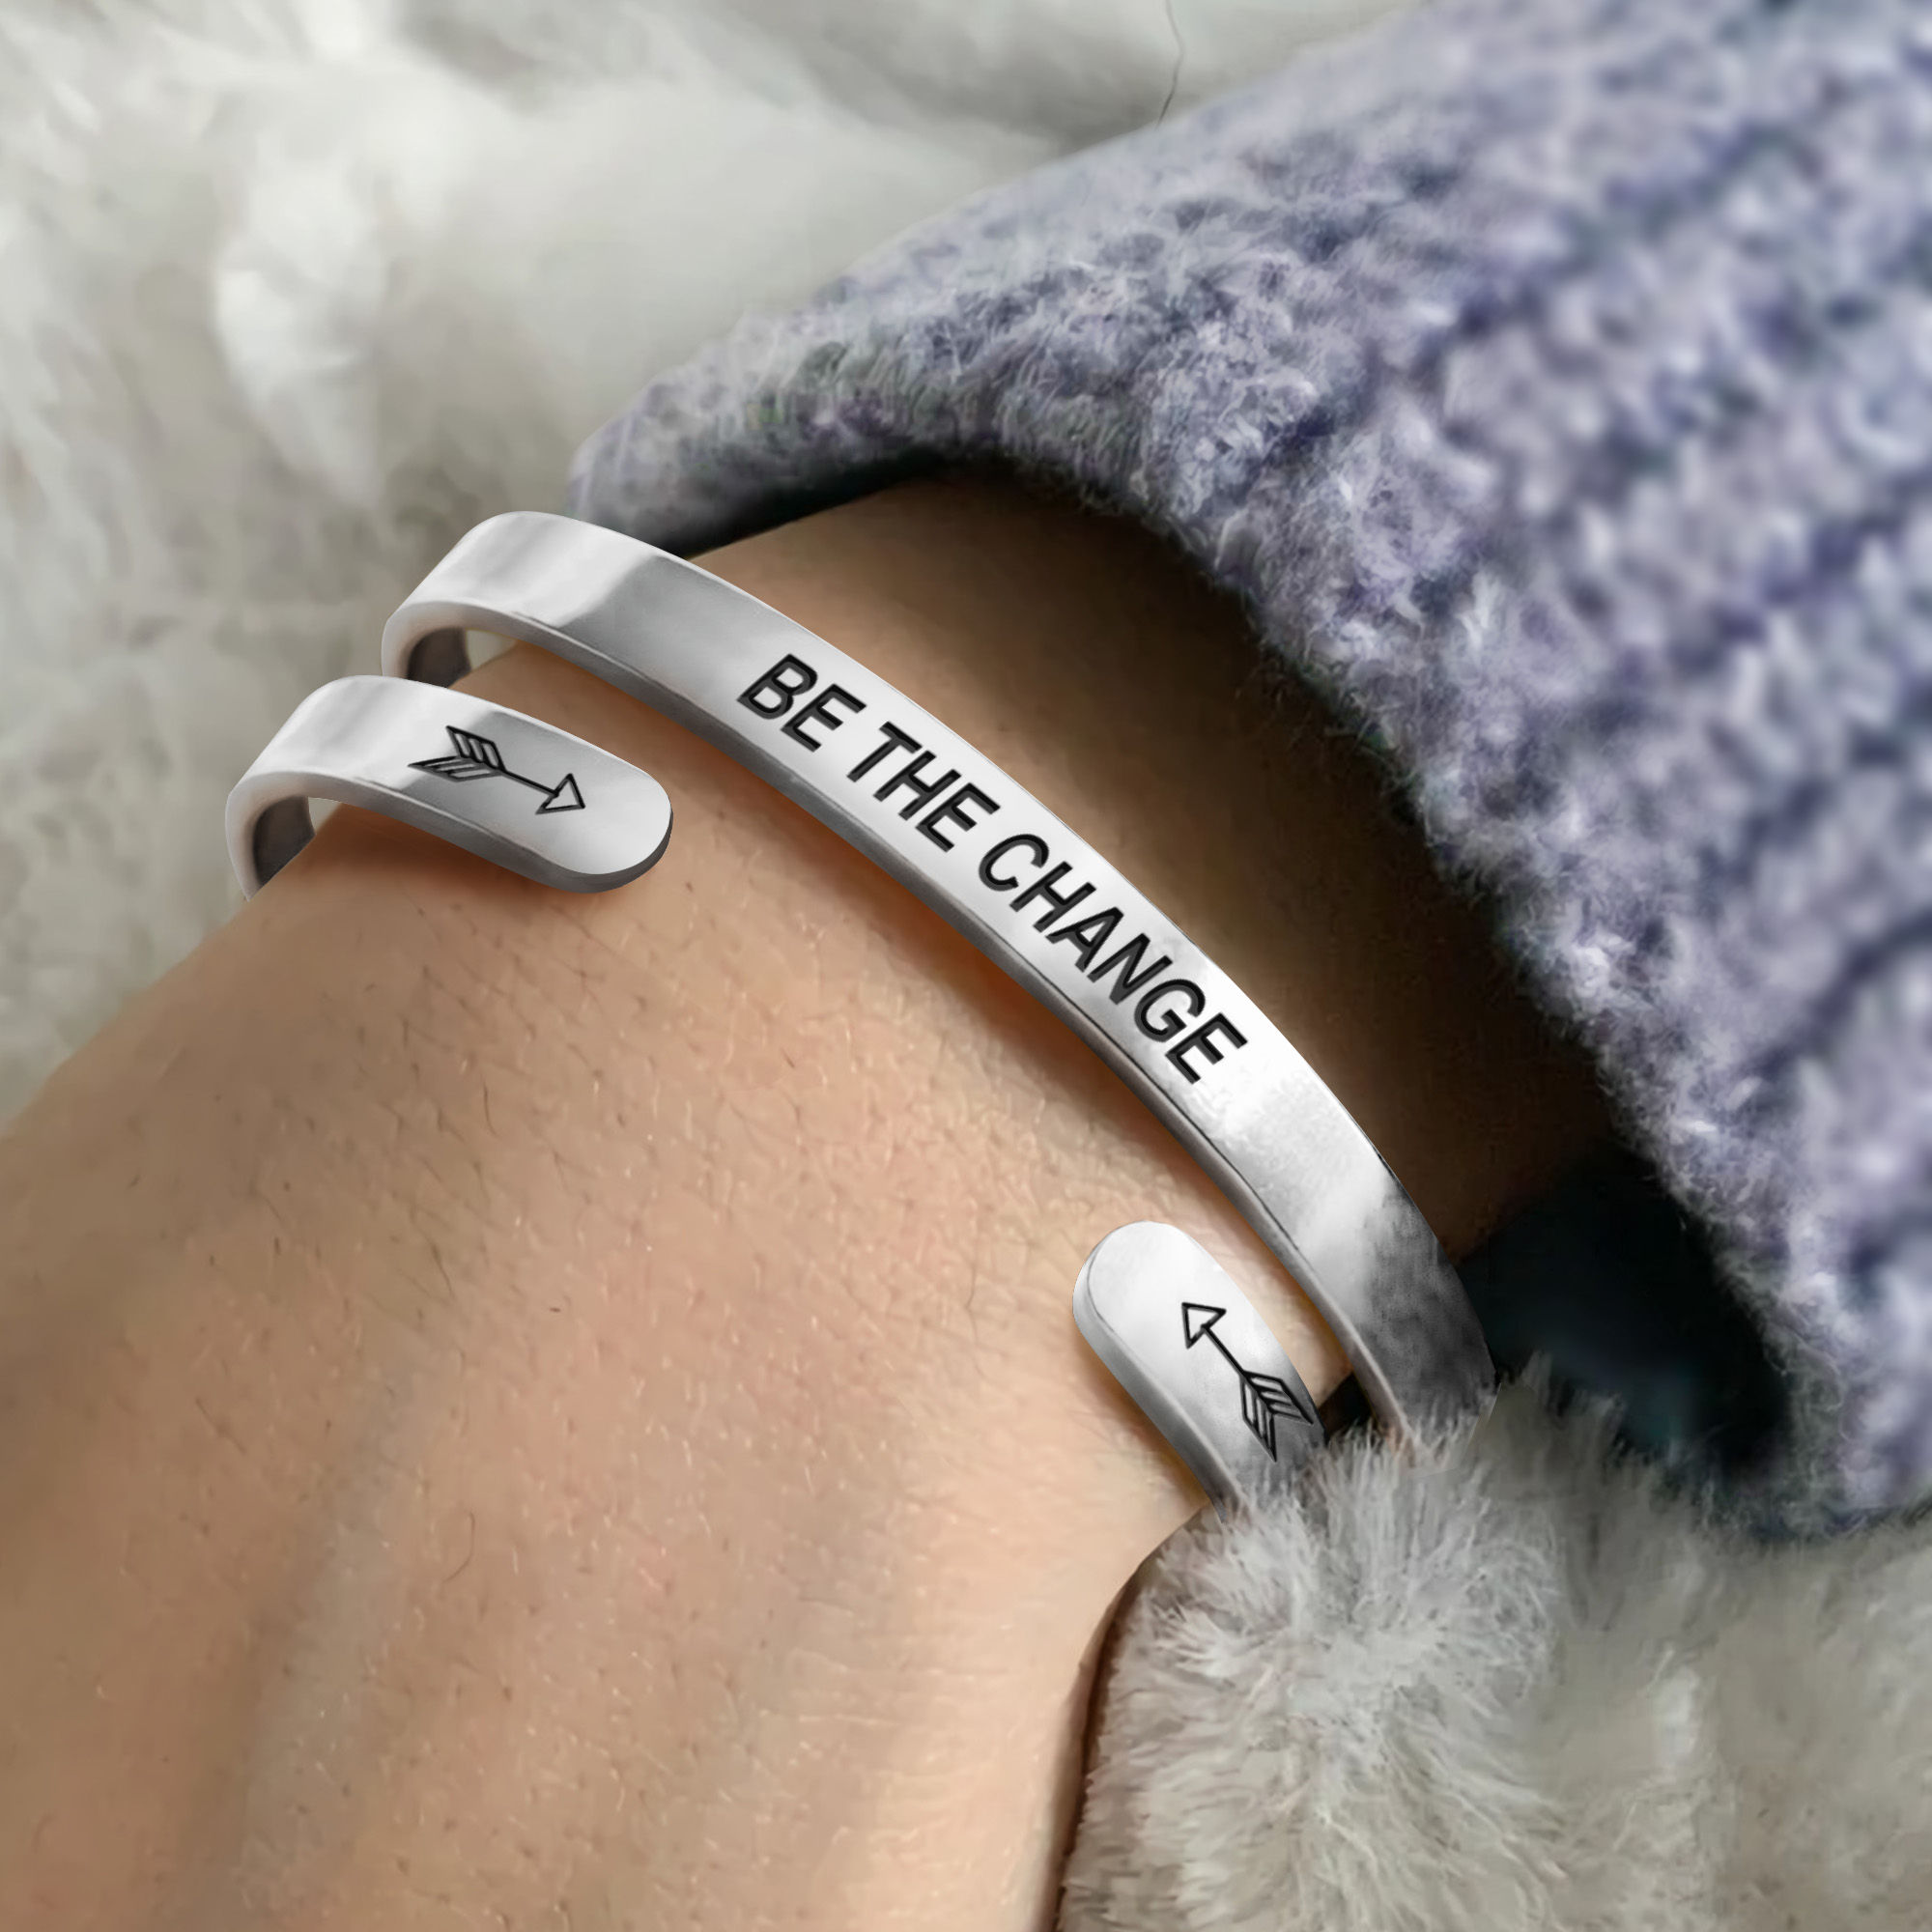 Positivity Gift - Be the change - Inspirational Bracelet - Outside quote